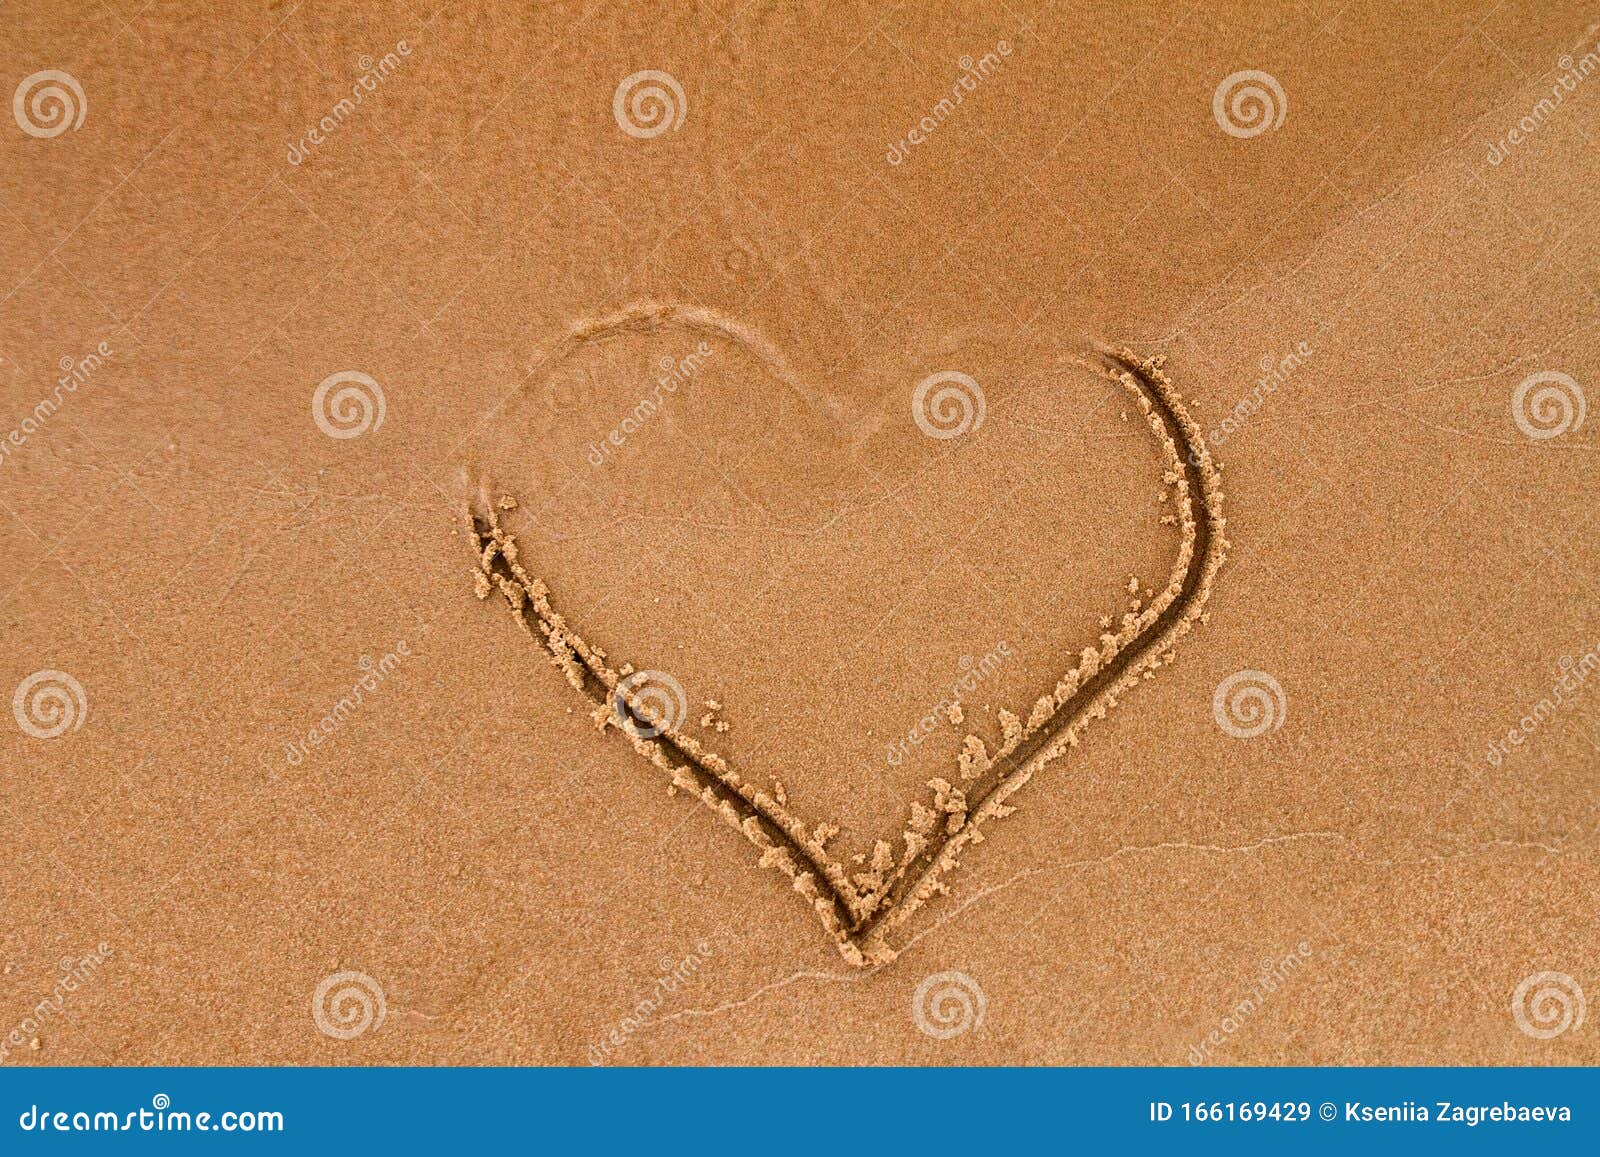 Hand Drawn Heart Shape On Wet Yellow Sand Covered By A Wave Of The Sea And Washed Away Stock Image Image Of Parting Feeling